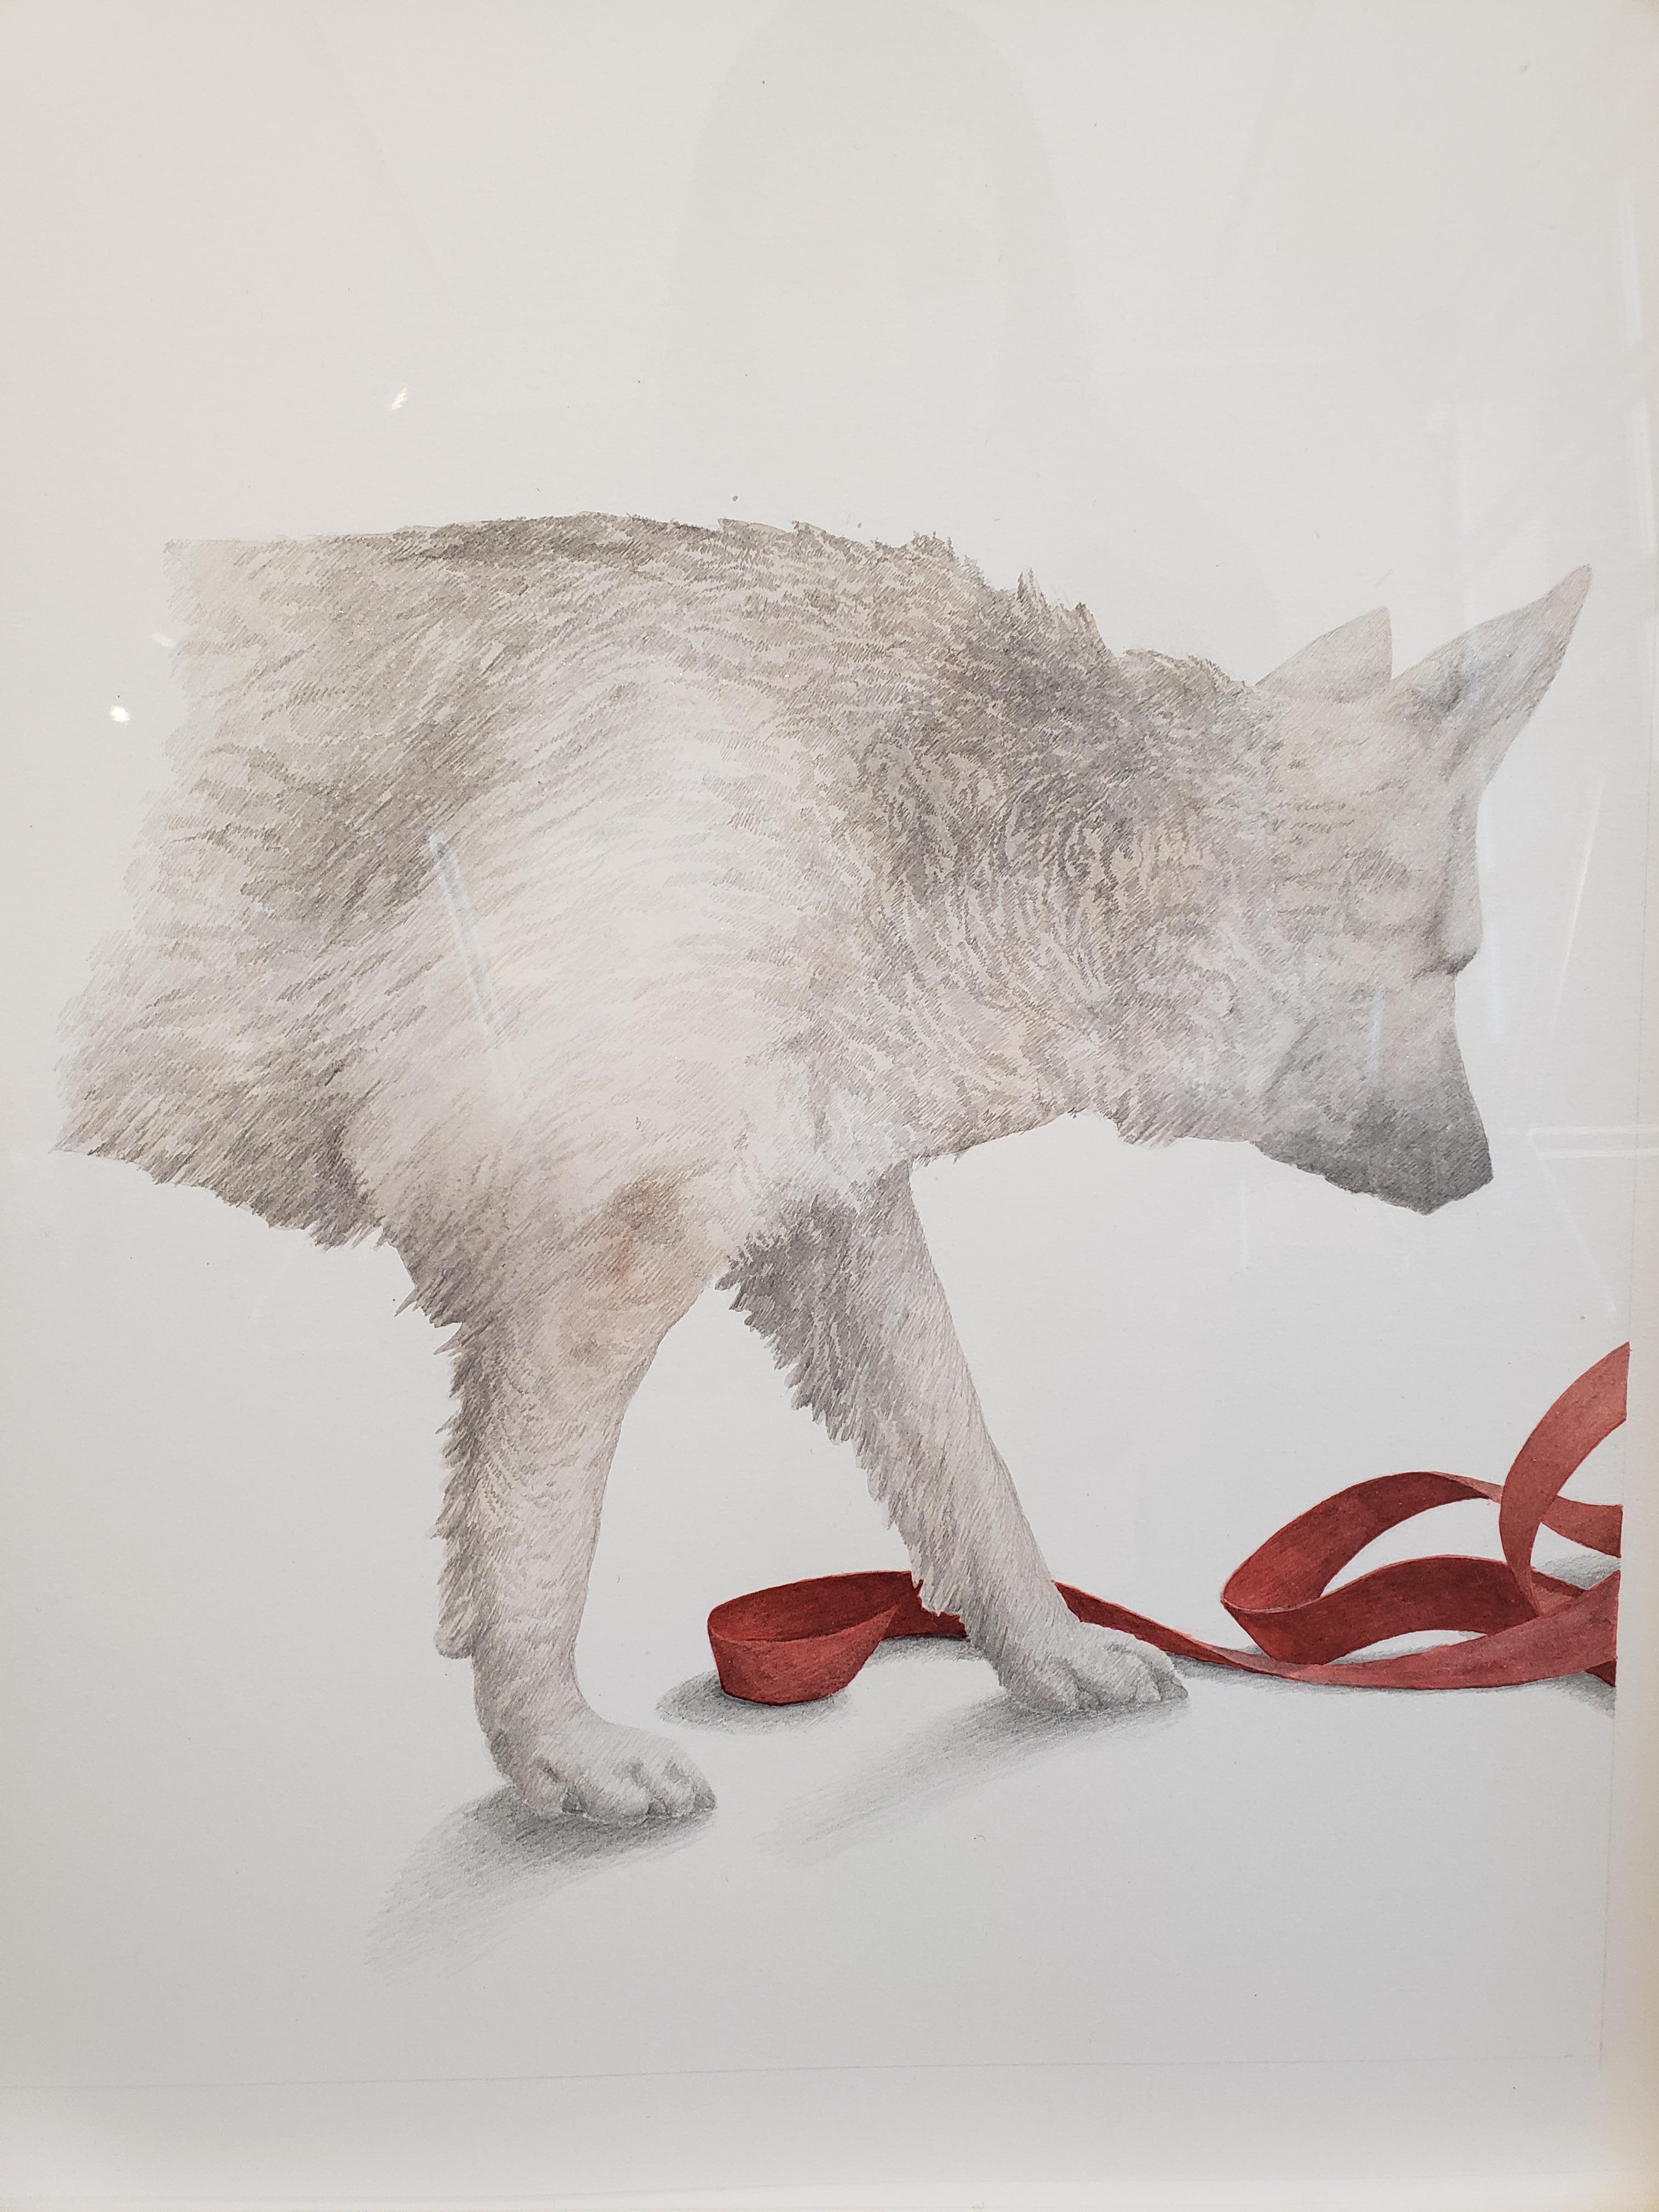 Greg Murr combines painting and drawing in airy compositions that function as philosophical inquiries into the flux of the natural world. In "With Ribbon," Murr depicts a wolf inspecting a red ribbon, which unfurls on the right side of the